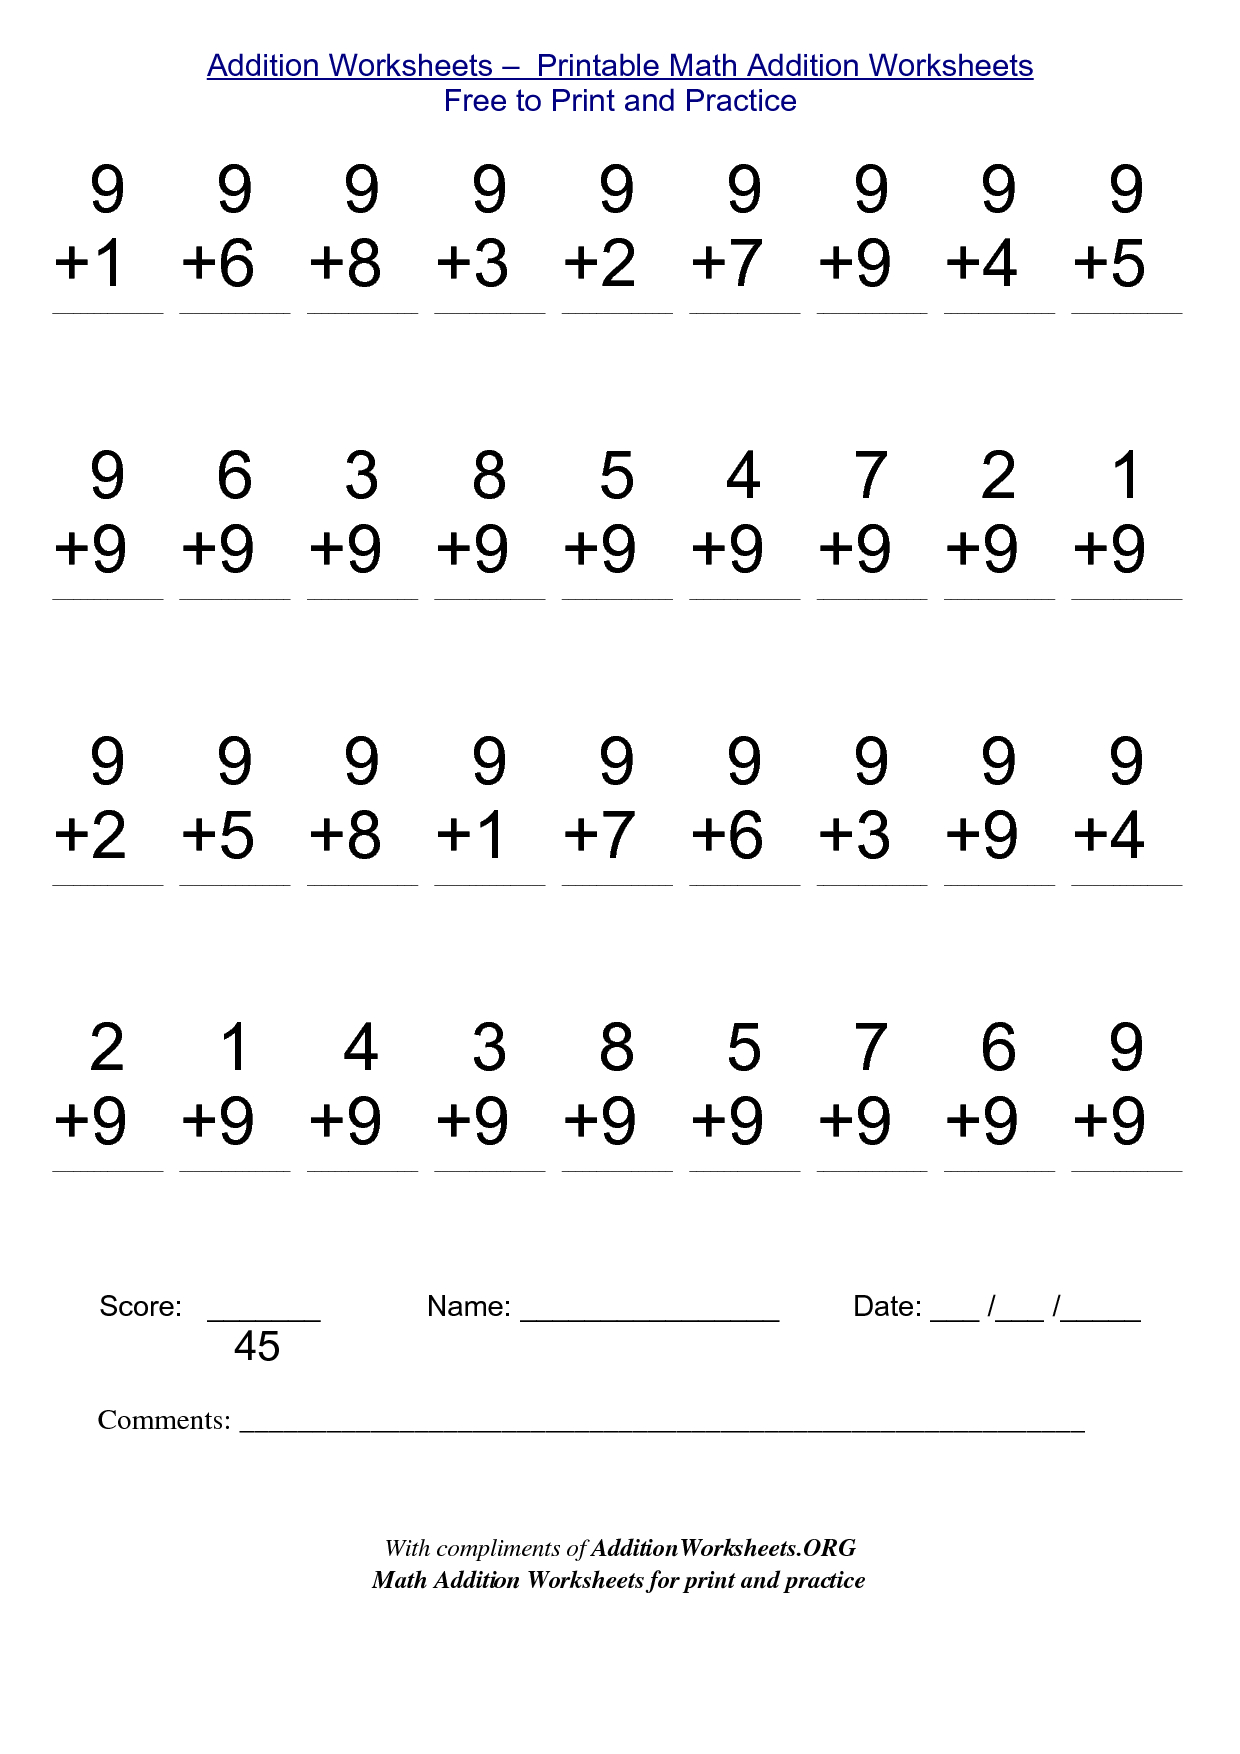 Math Worksheets For Free To Print - Alot | Me | Math Worksheets - Free Printable Second Grade Math Worksheets